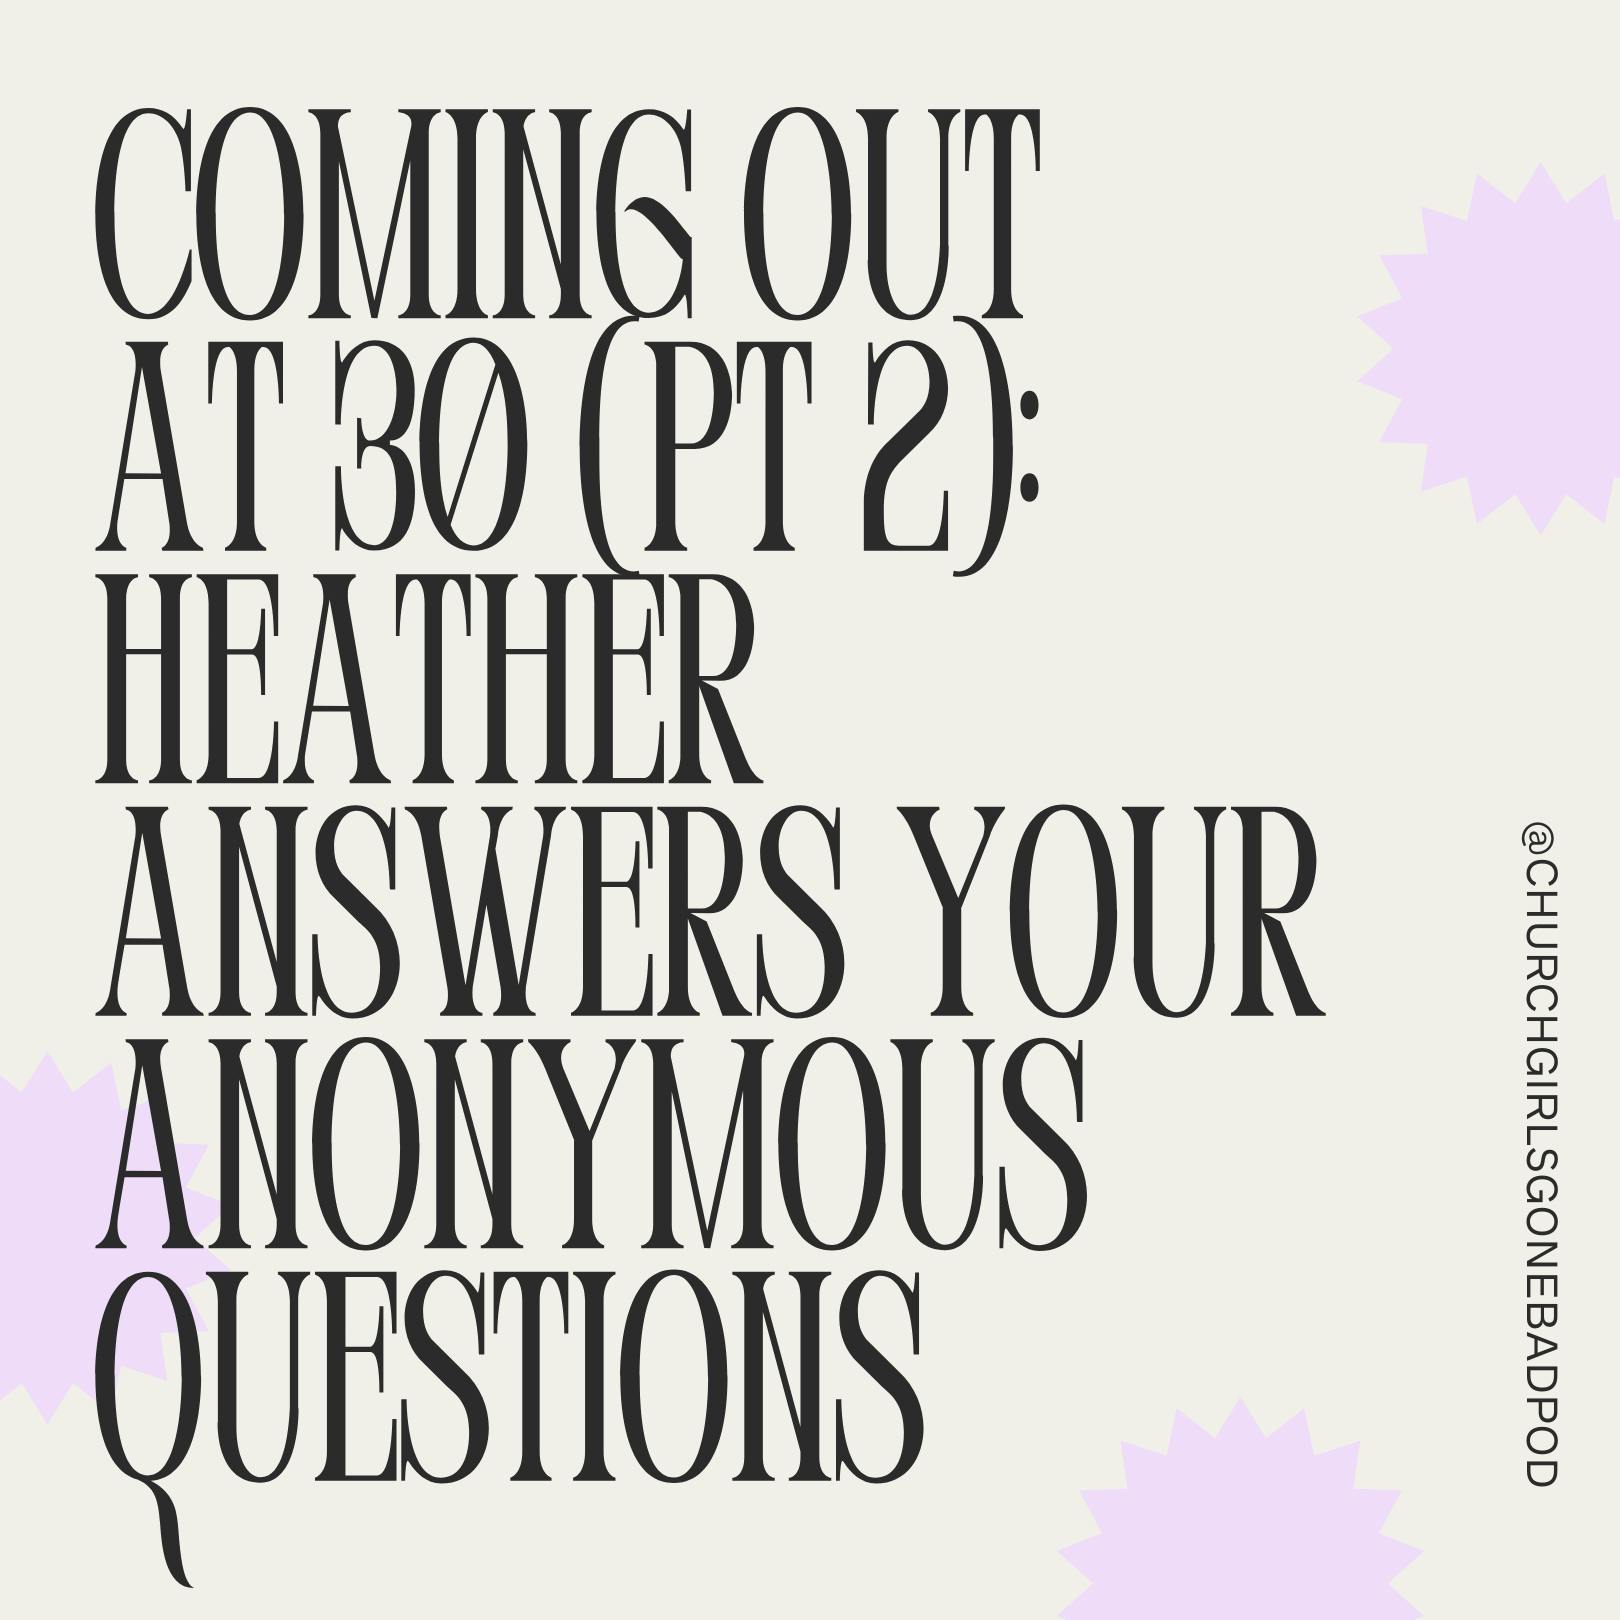 Coming Out at 30 (Pt. 2): Heather Answers your Anonymous Questions